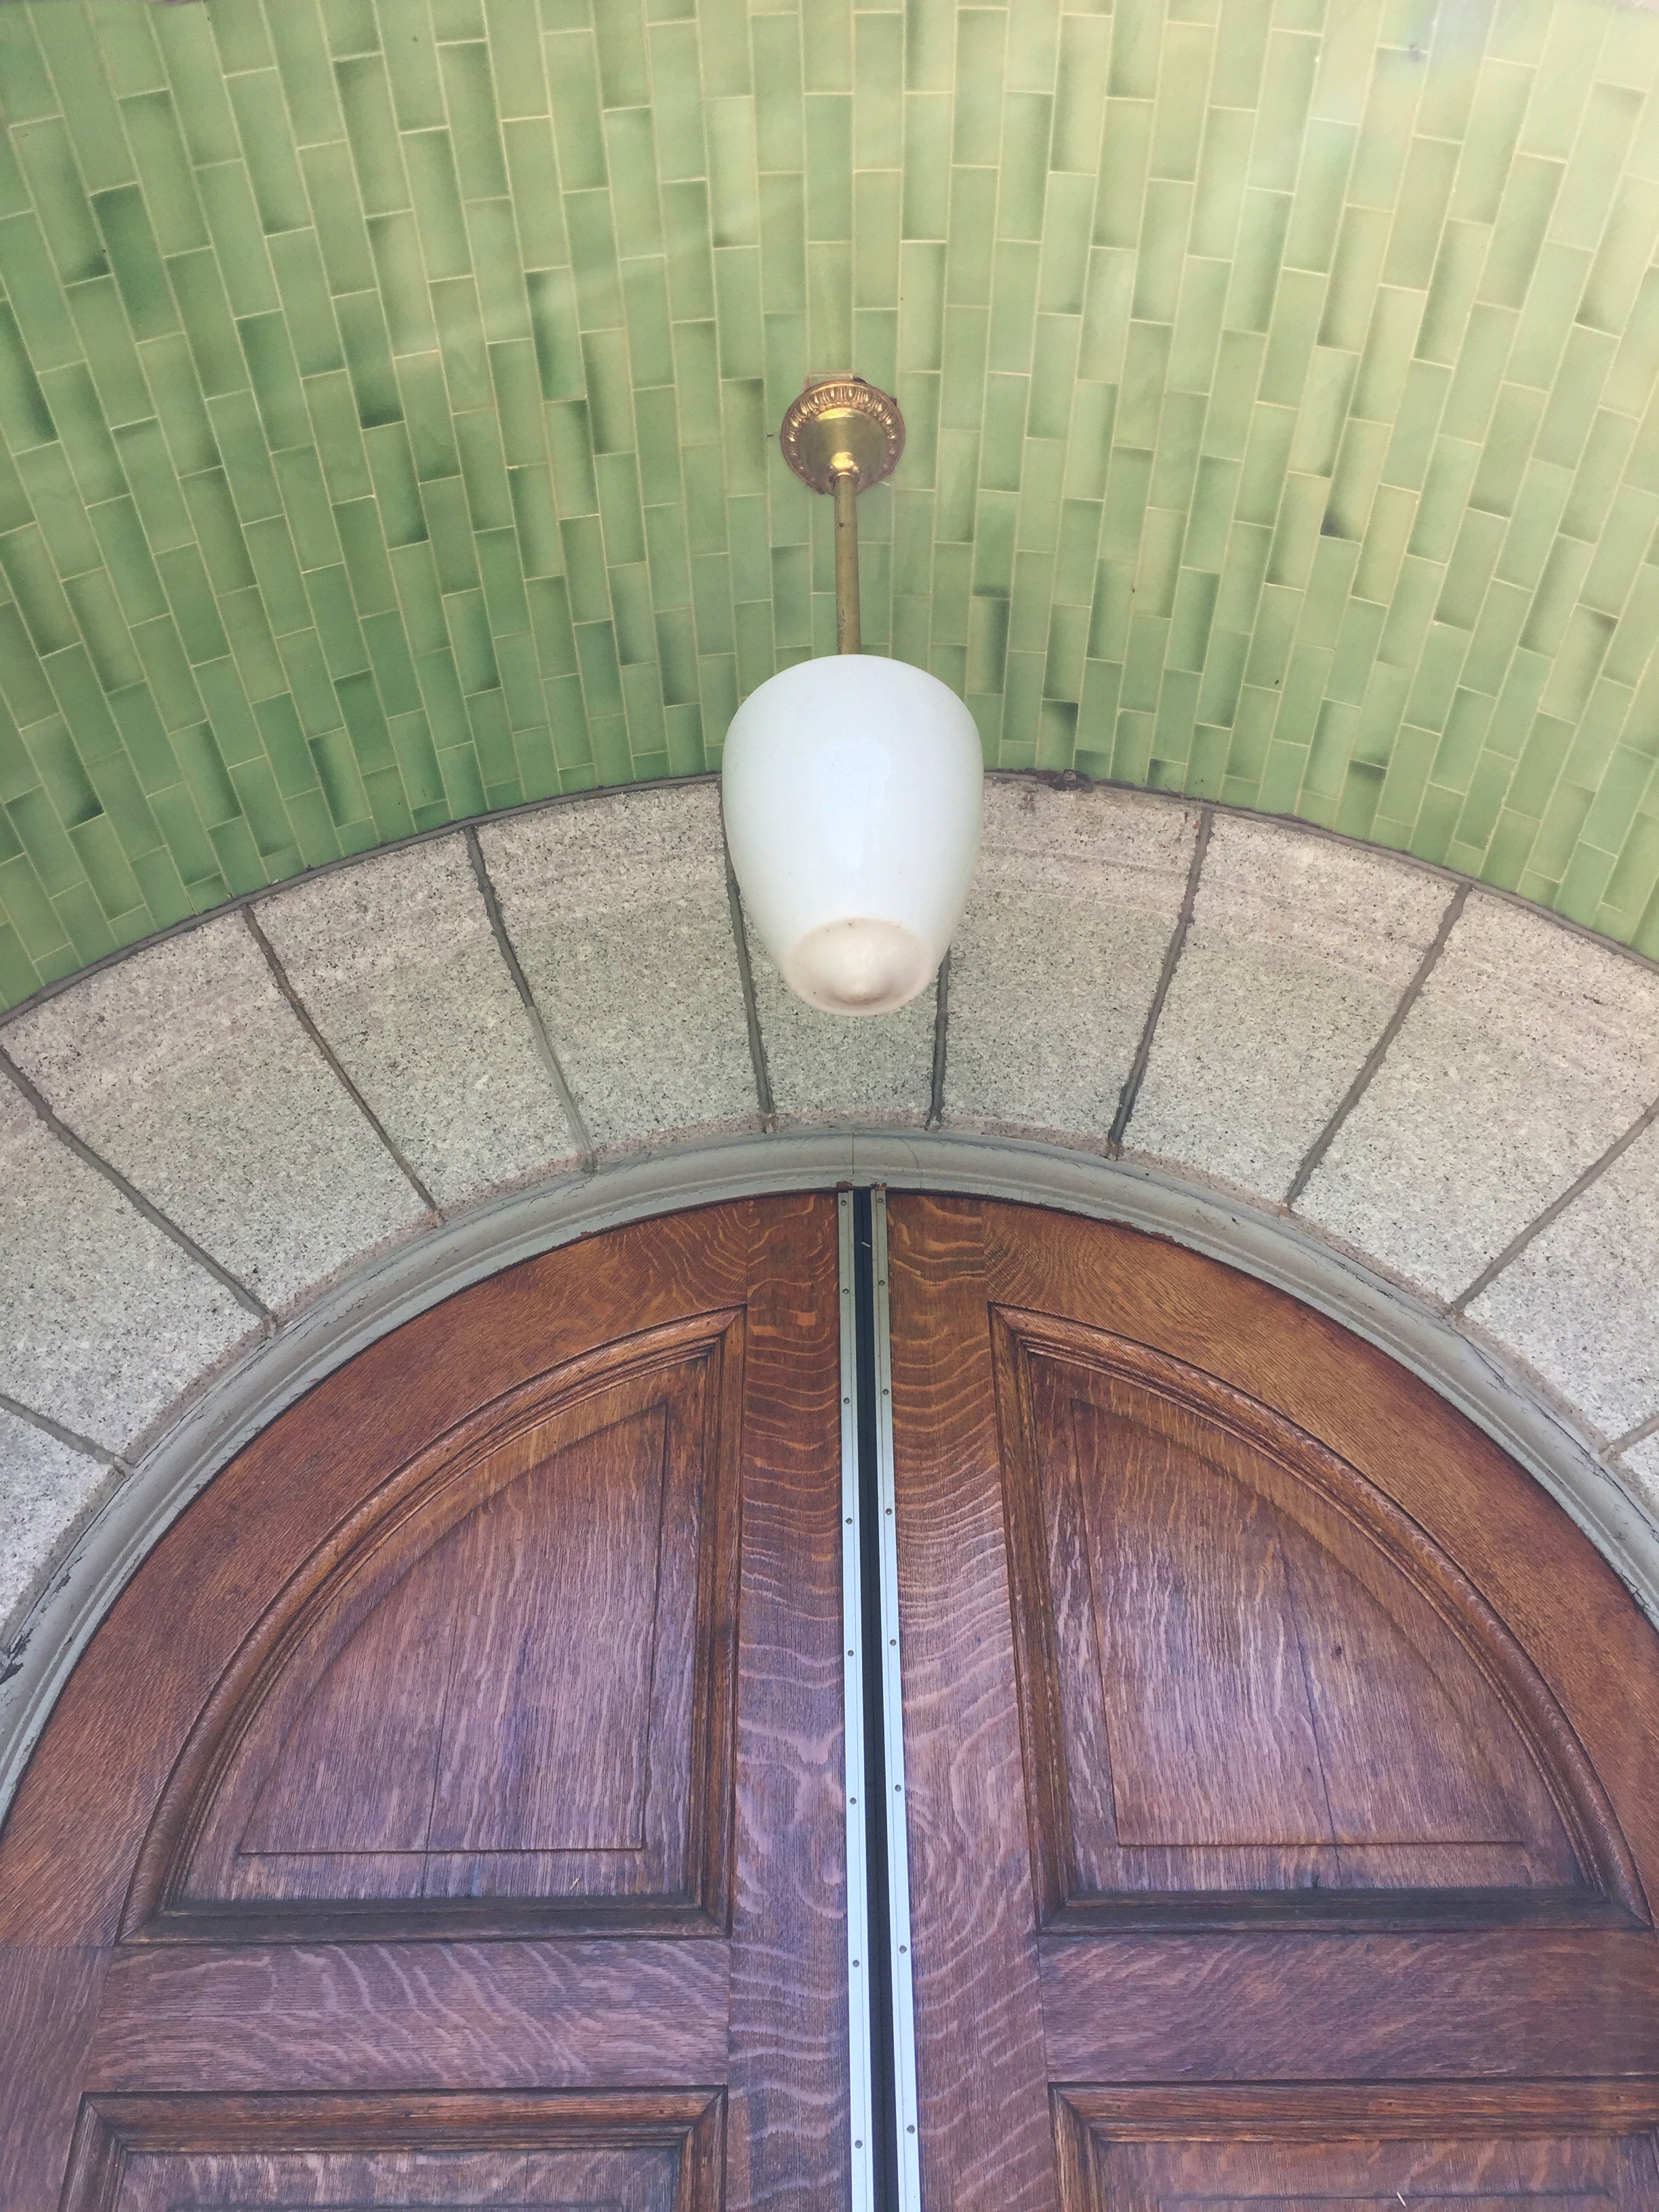 architectural detail with wood door and mosaic ceiling